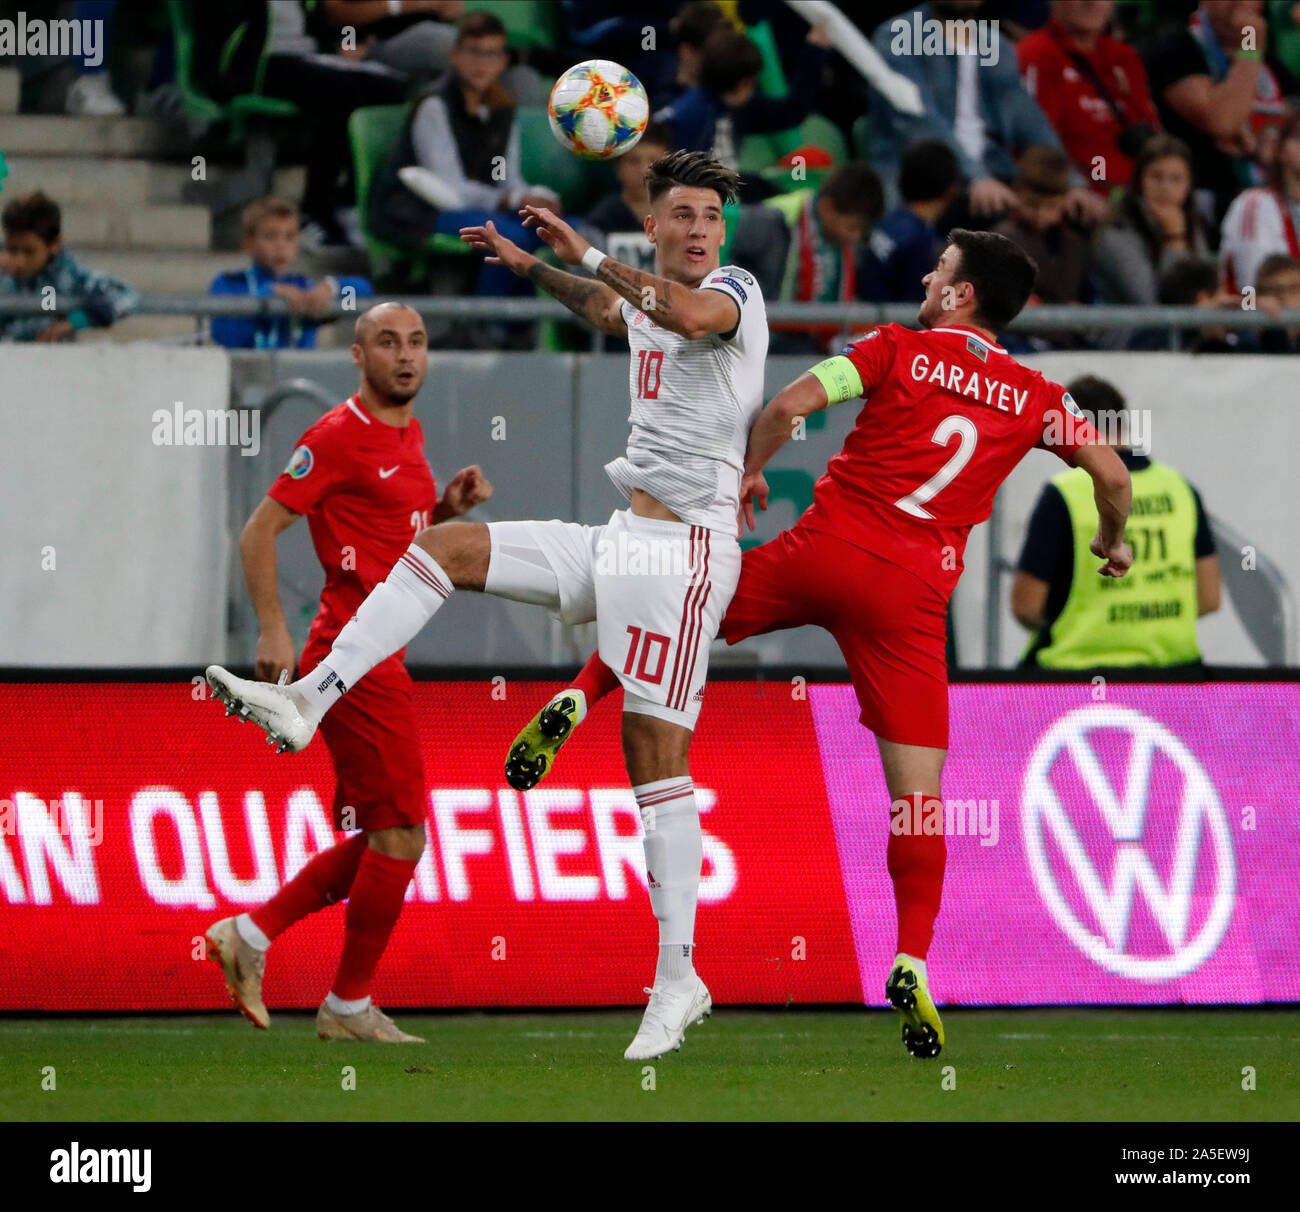 BUDAPEST, HUNGARY - OCTOBER 13, 2019: Dominik Szoboszlai #10 battles for the ball in the air with Gara Garayev #2 in front of Pavlo Pashayev (l) during the Hungary v Azerbaijan UEFA Euro Qualifier at Groupama Arena. Stock Photo